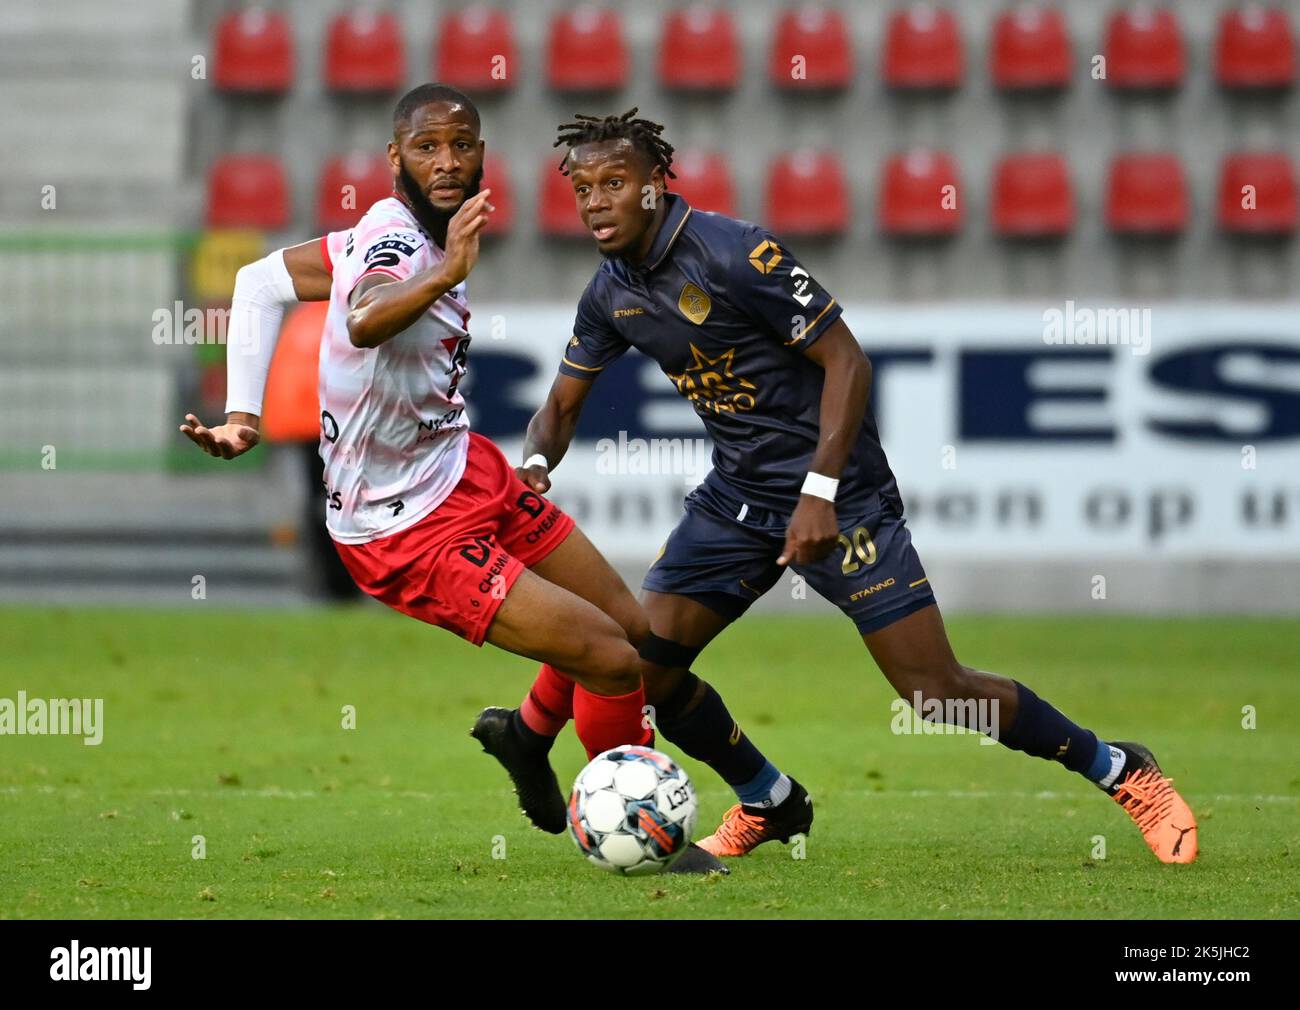 Essevee's Abdulaye Sissako and OHL's Hamza Mendyl fight for the ball during a soccer match between SV Zulte Waregem and OH Leuven, Saturday 08 October 2022 in Waregem, on day 11 of the 2022-2023 'Jupiler Pro League' first division of the Belgian championship. BELGA PHOTO JOHN THYS Stock Photo